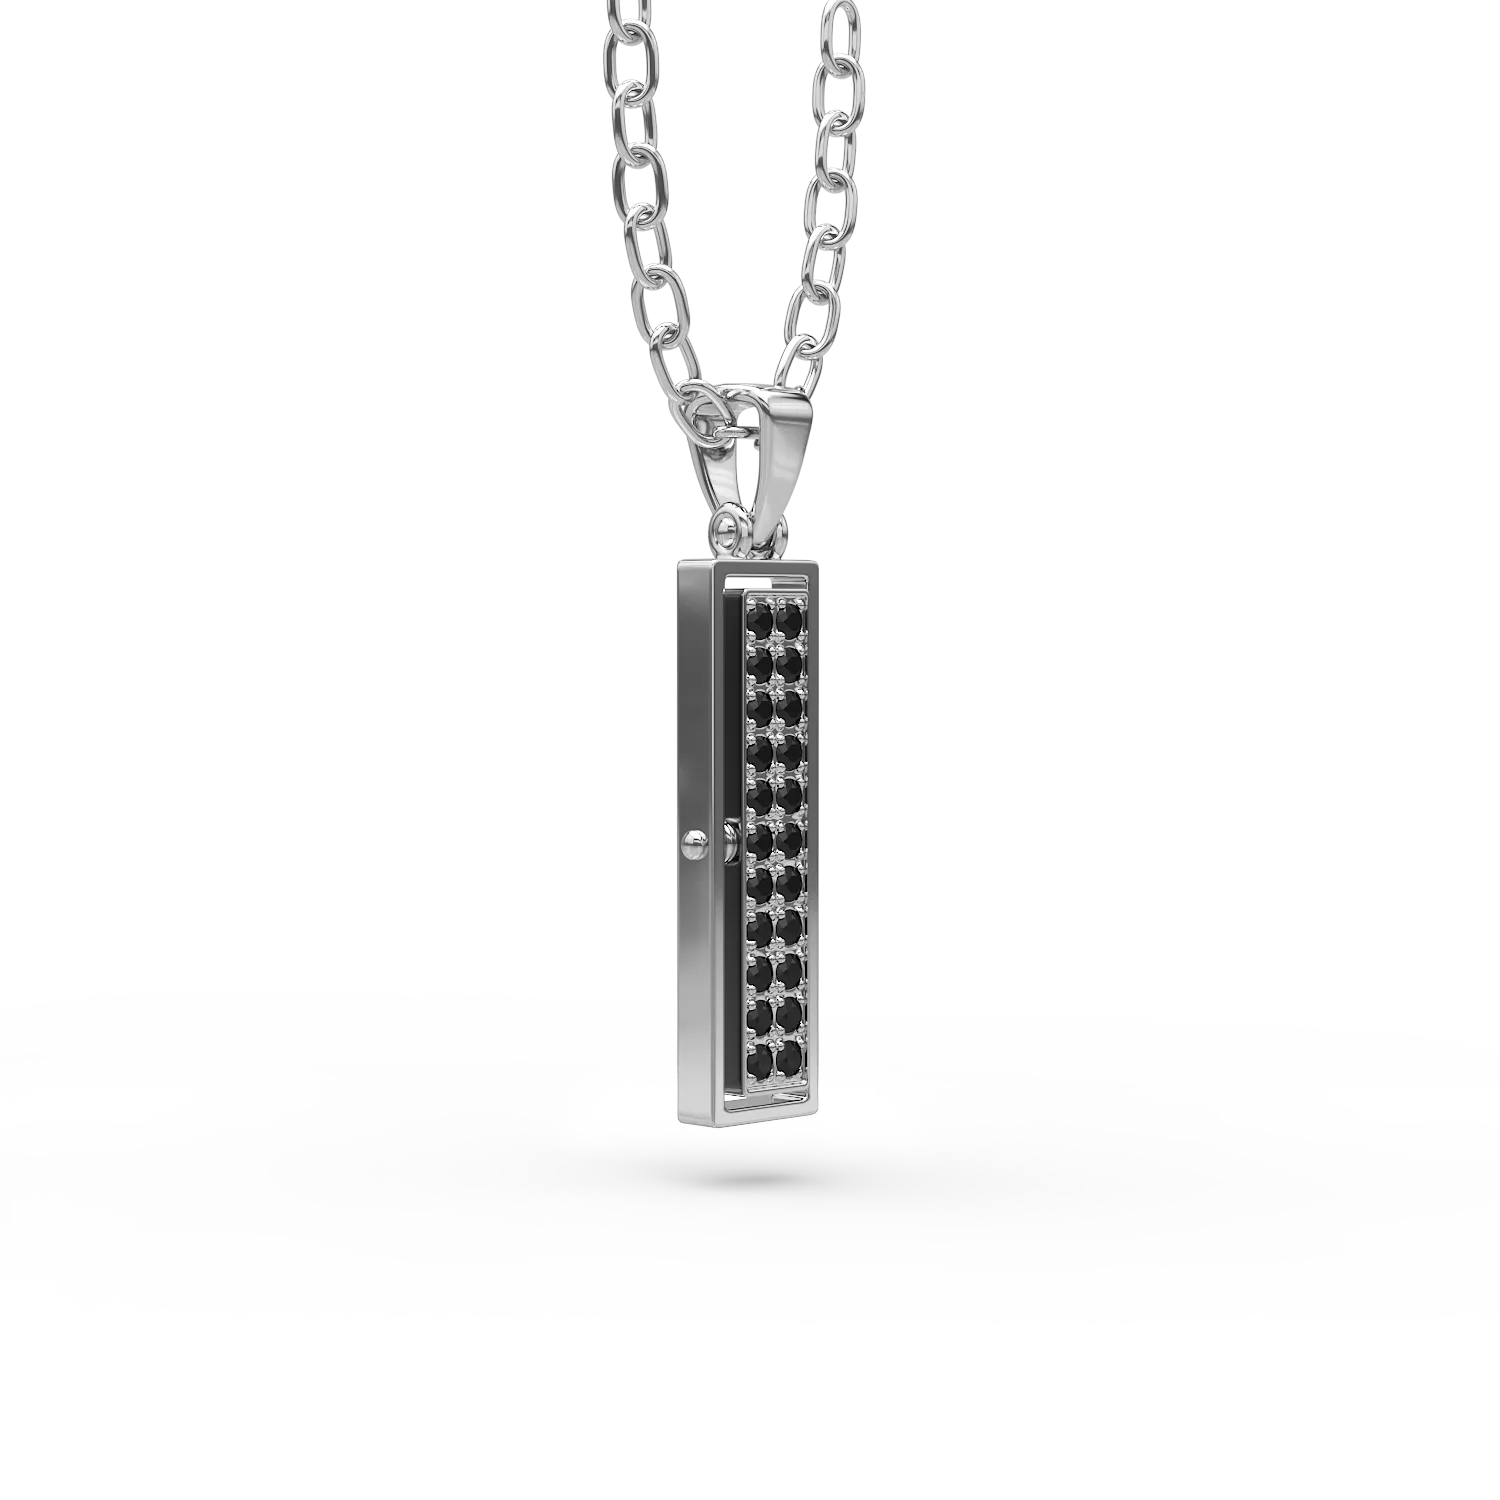 Silver Towers pendant necklace